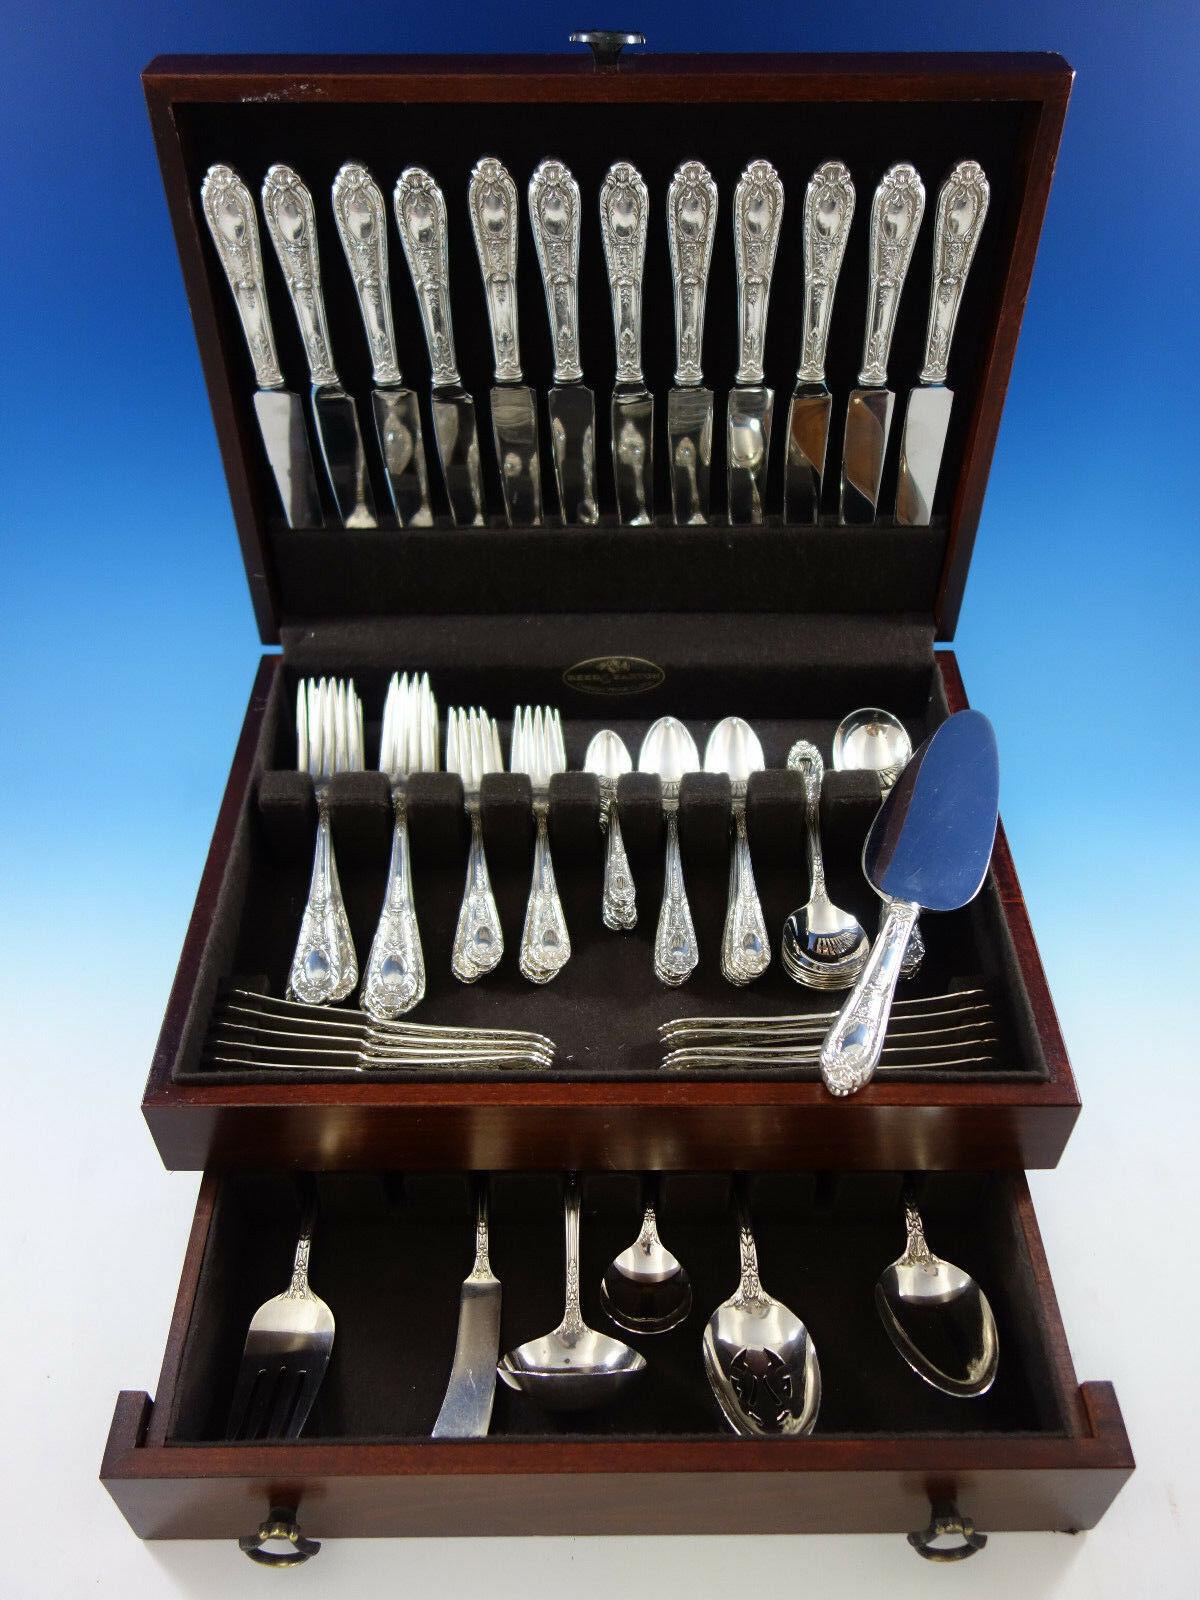 Gorgeous dinner size Fontaine by International sterling silver flatware set - 91 pieces. This set includes:

12 dinner size knives, 9 5/8